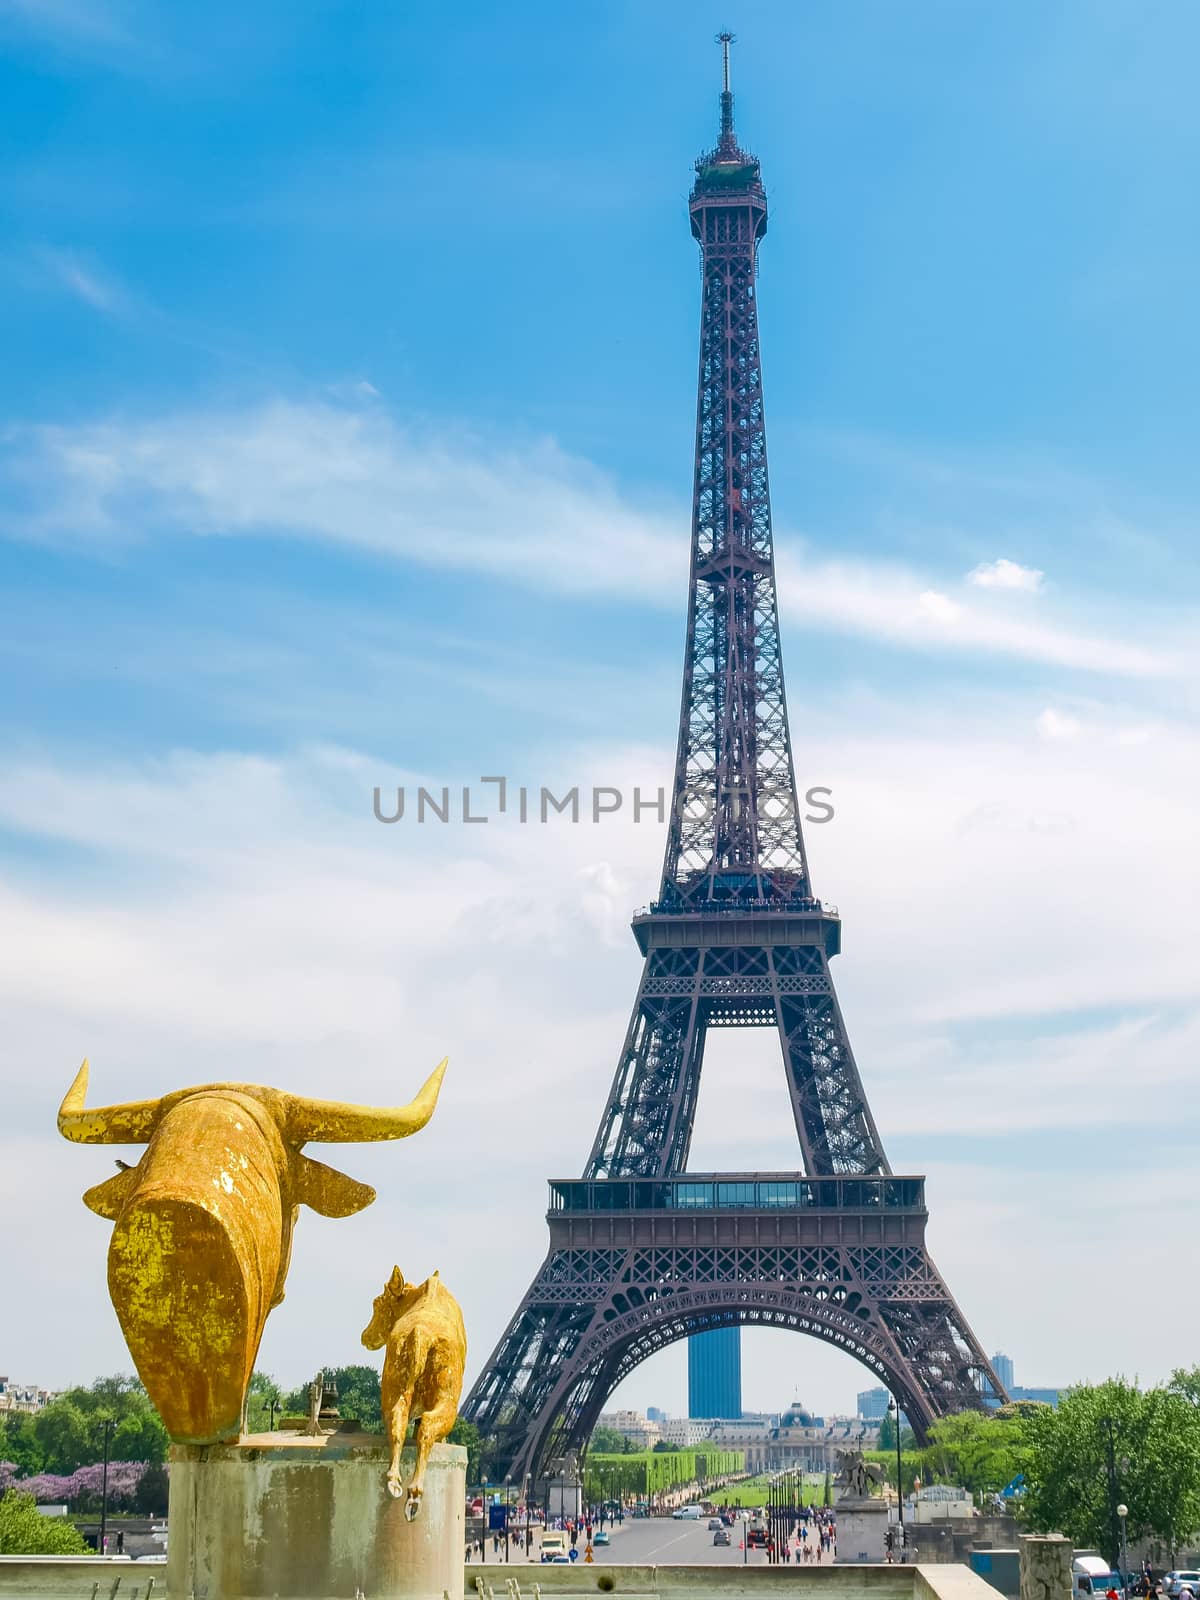 Eiffel Tower from the Trocadero Square in Paris by anmbph